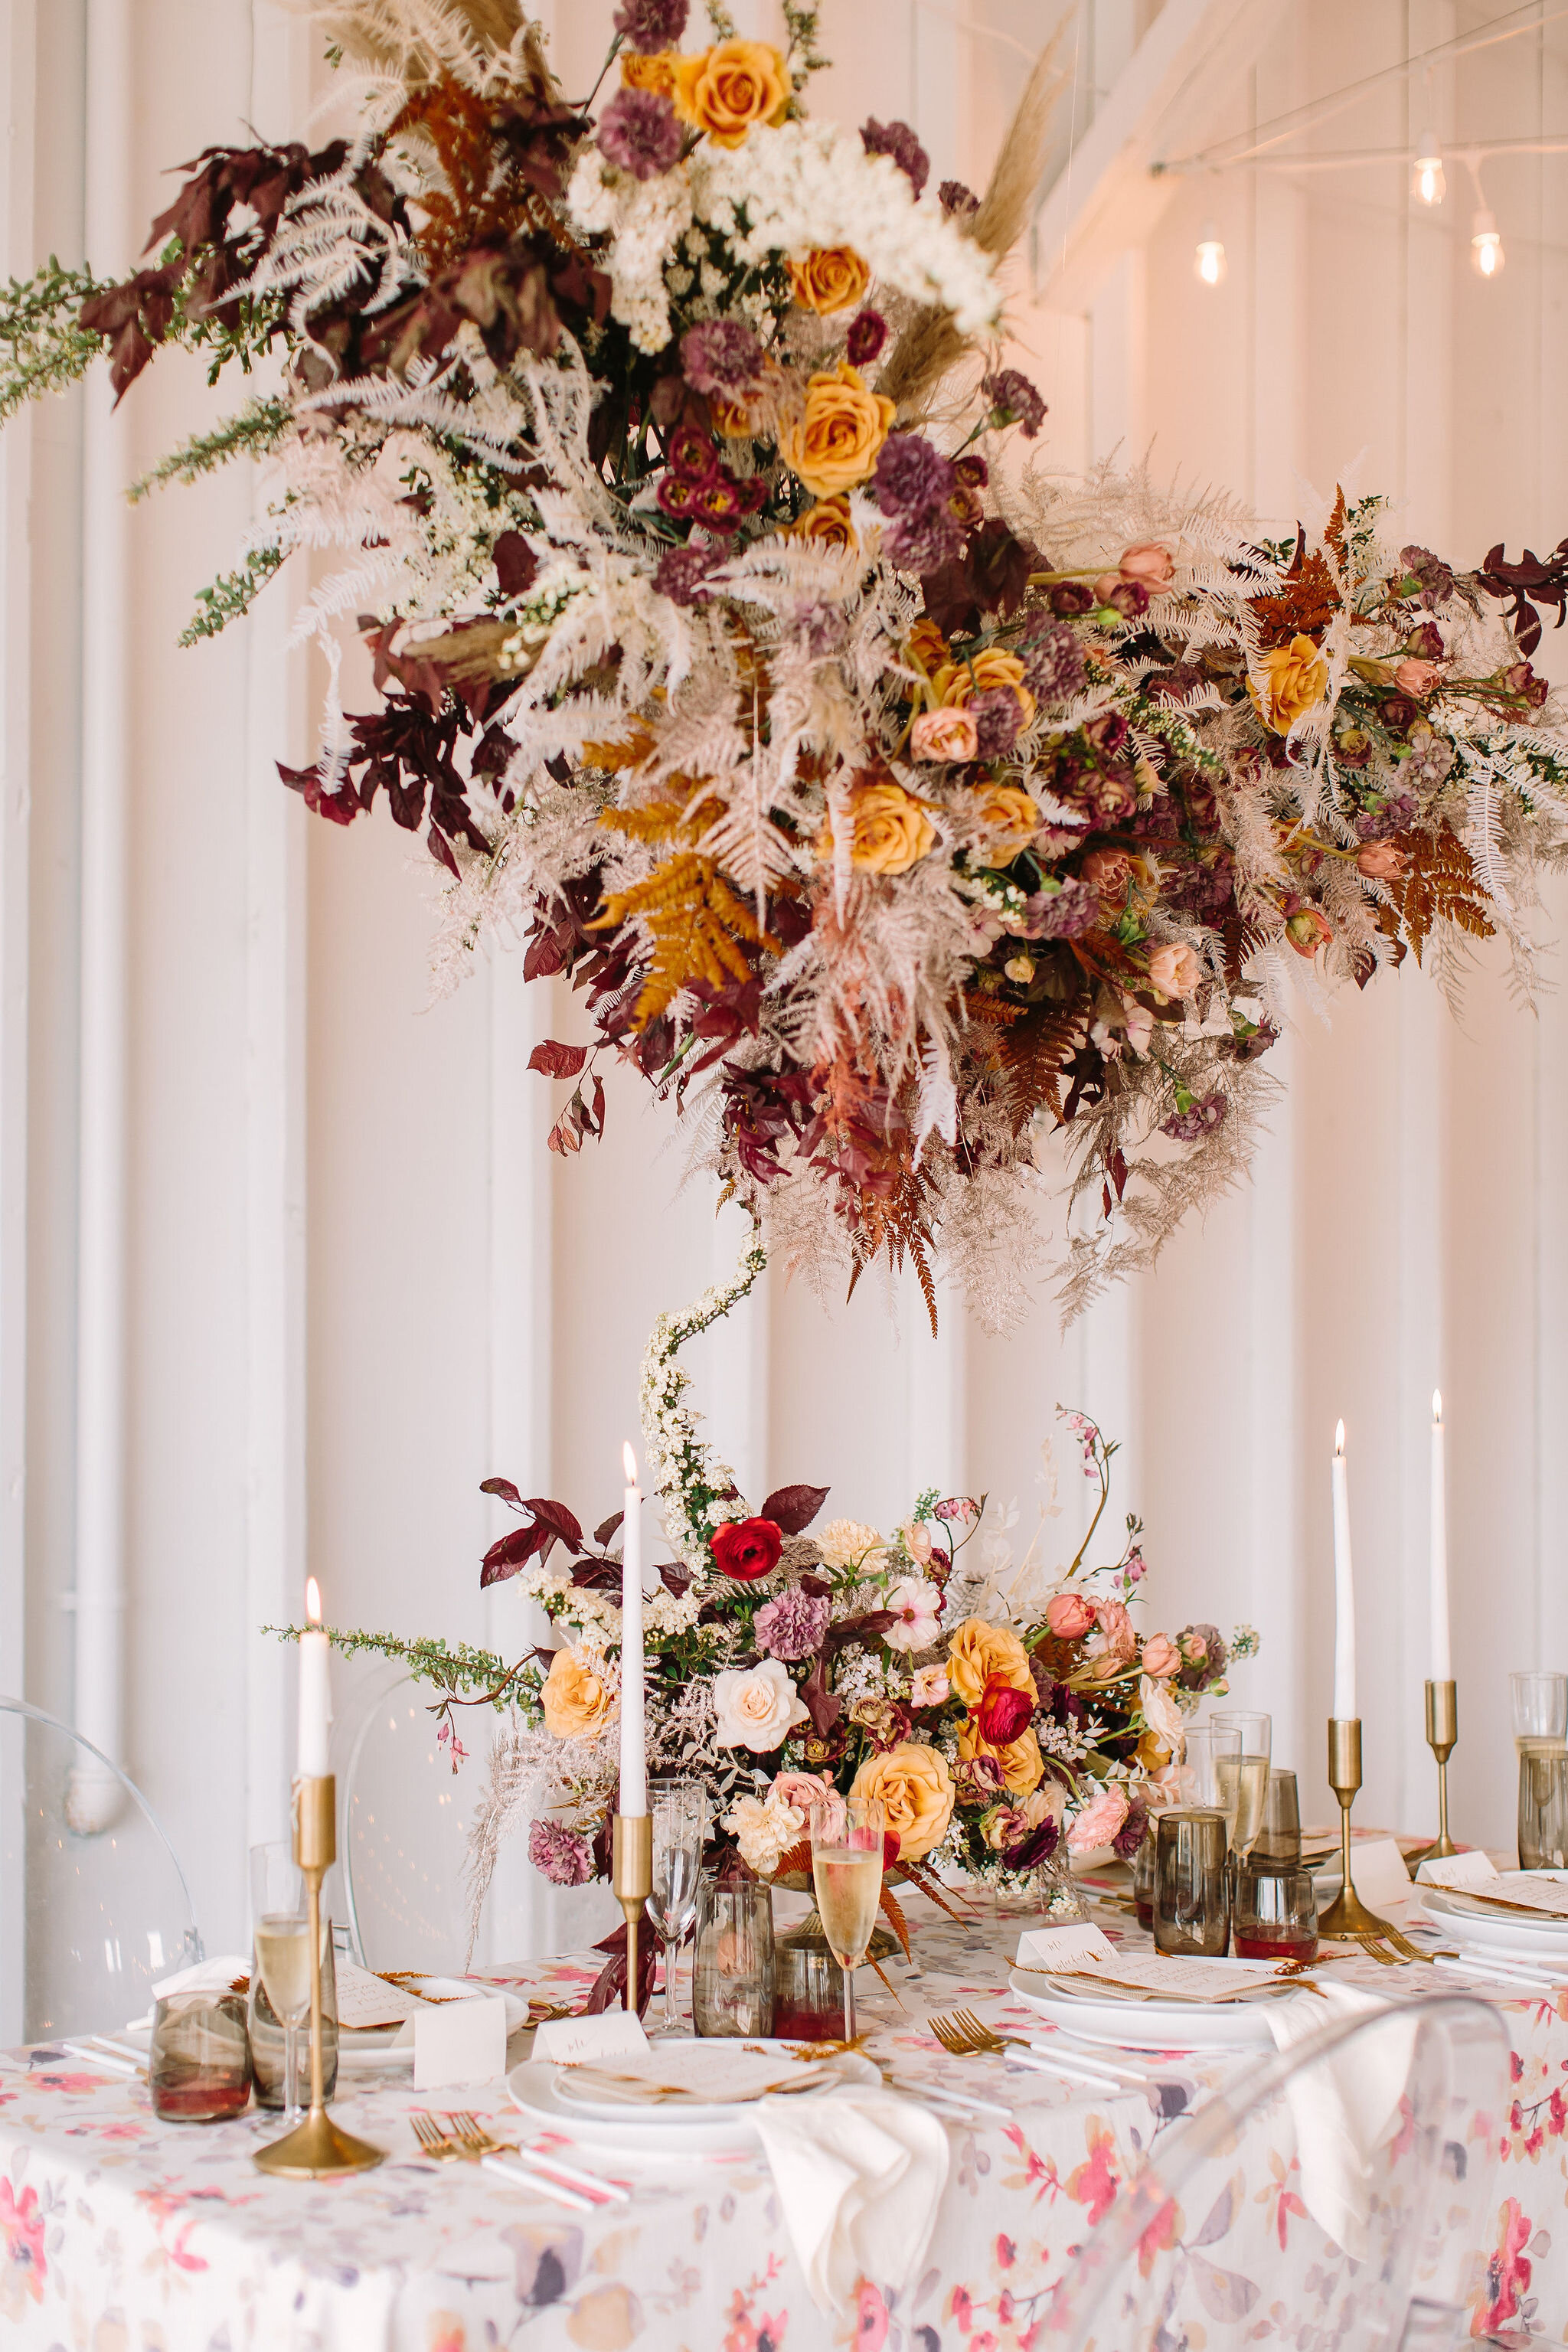 Modern hanging floral cloud installation with spirea, pampas grass, dried white fern, dyed plumosa, gold combo roses, Roseanne lisianthks, plum foliage, brown tulips, and red ranunculus. Nashville wedding and event floral design.